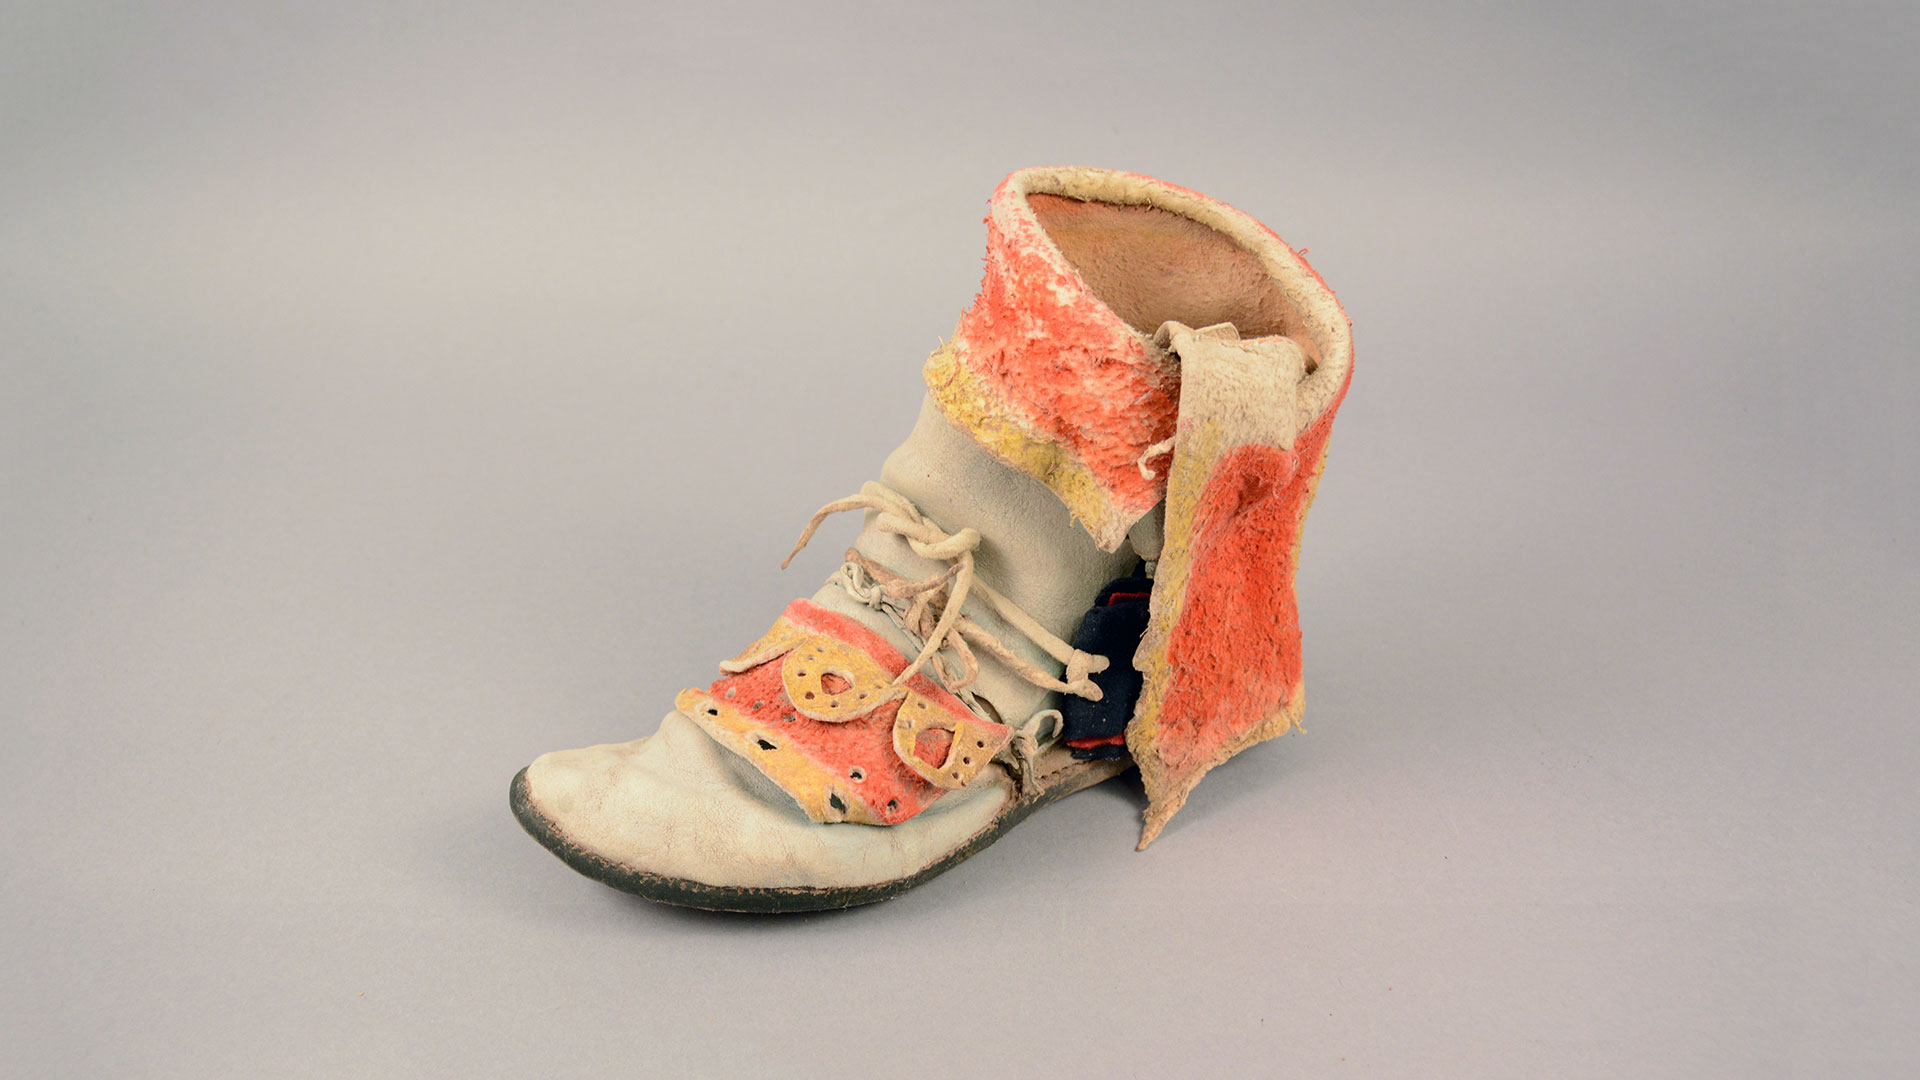 cream colored boot with orange and yellow animal hide accents